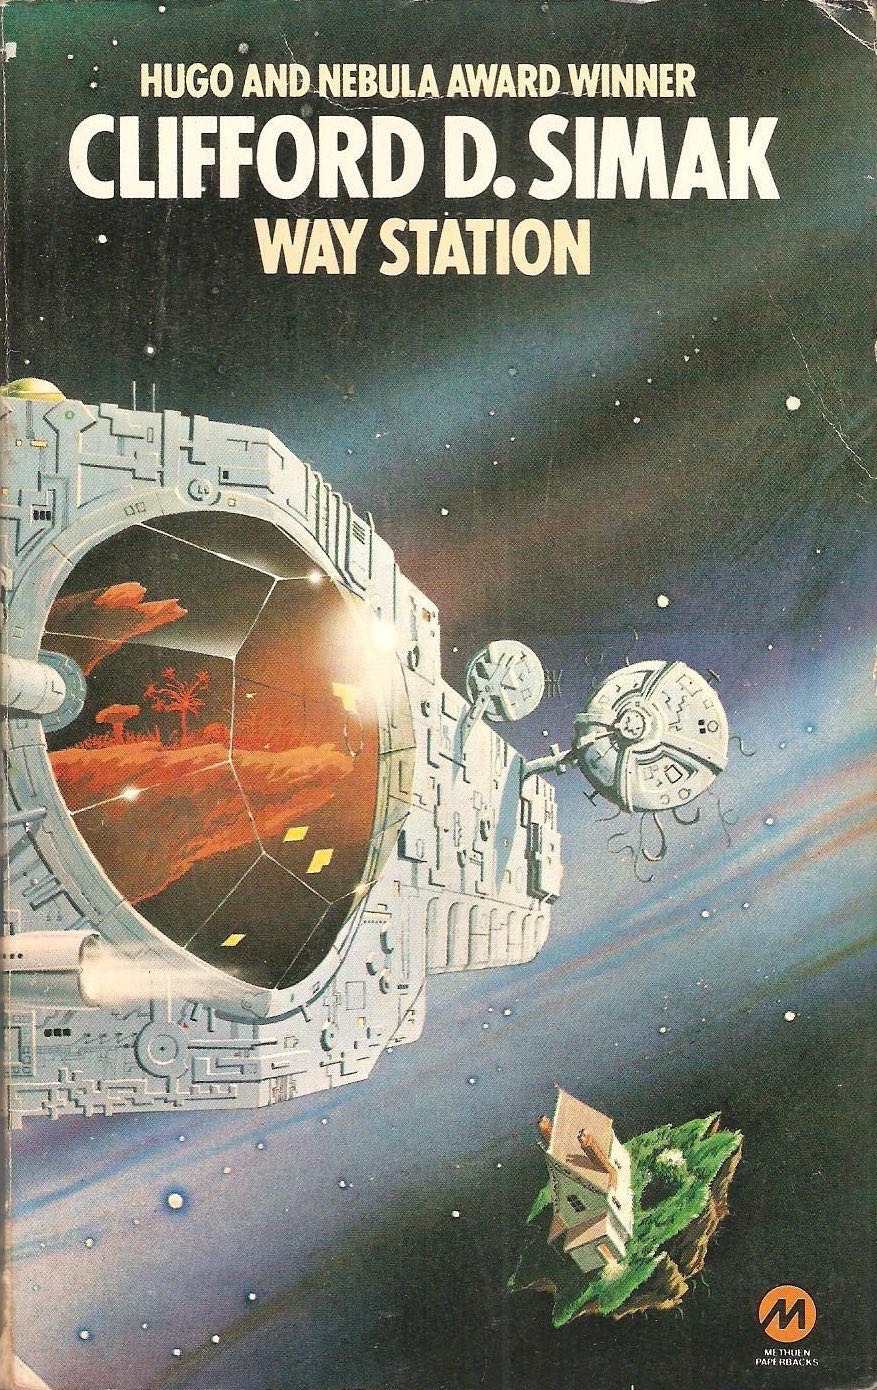 way station by clifford d simak